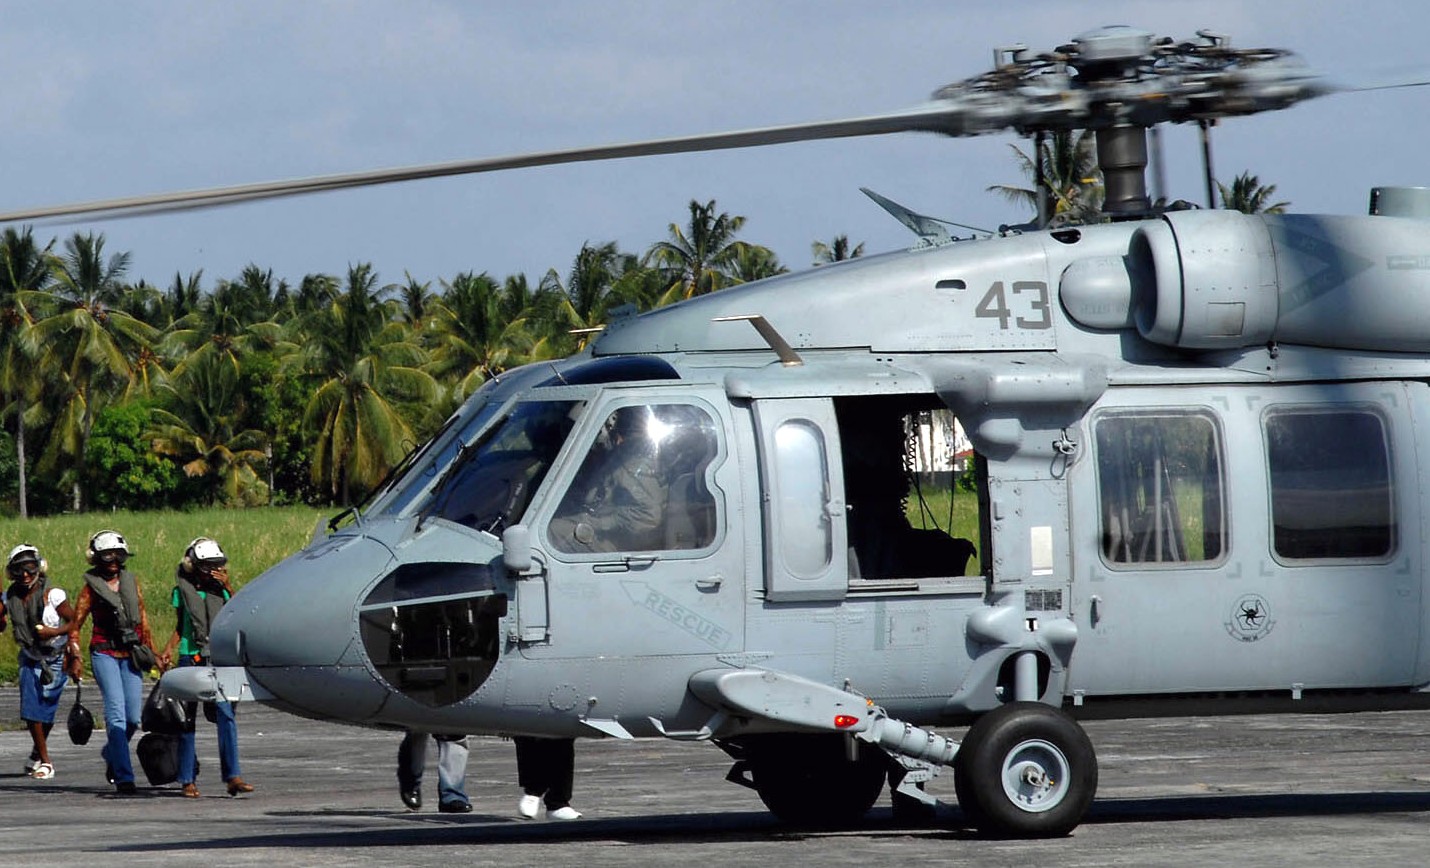 hsc-28 dragon whales helicopter sea combat squadron mh-60s seahawk us navy 131 guyana